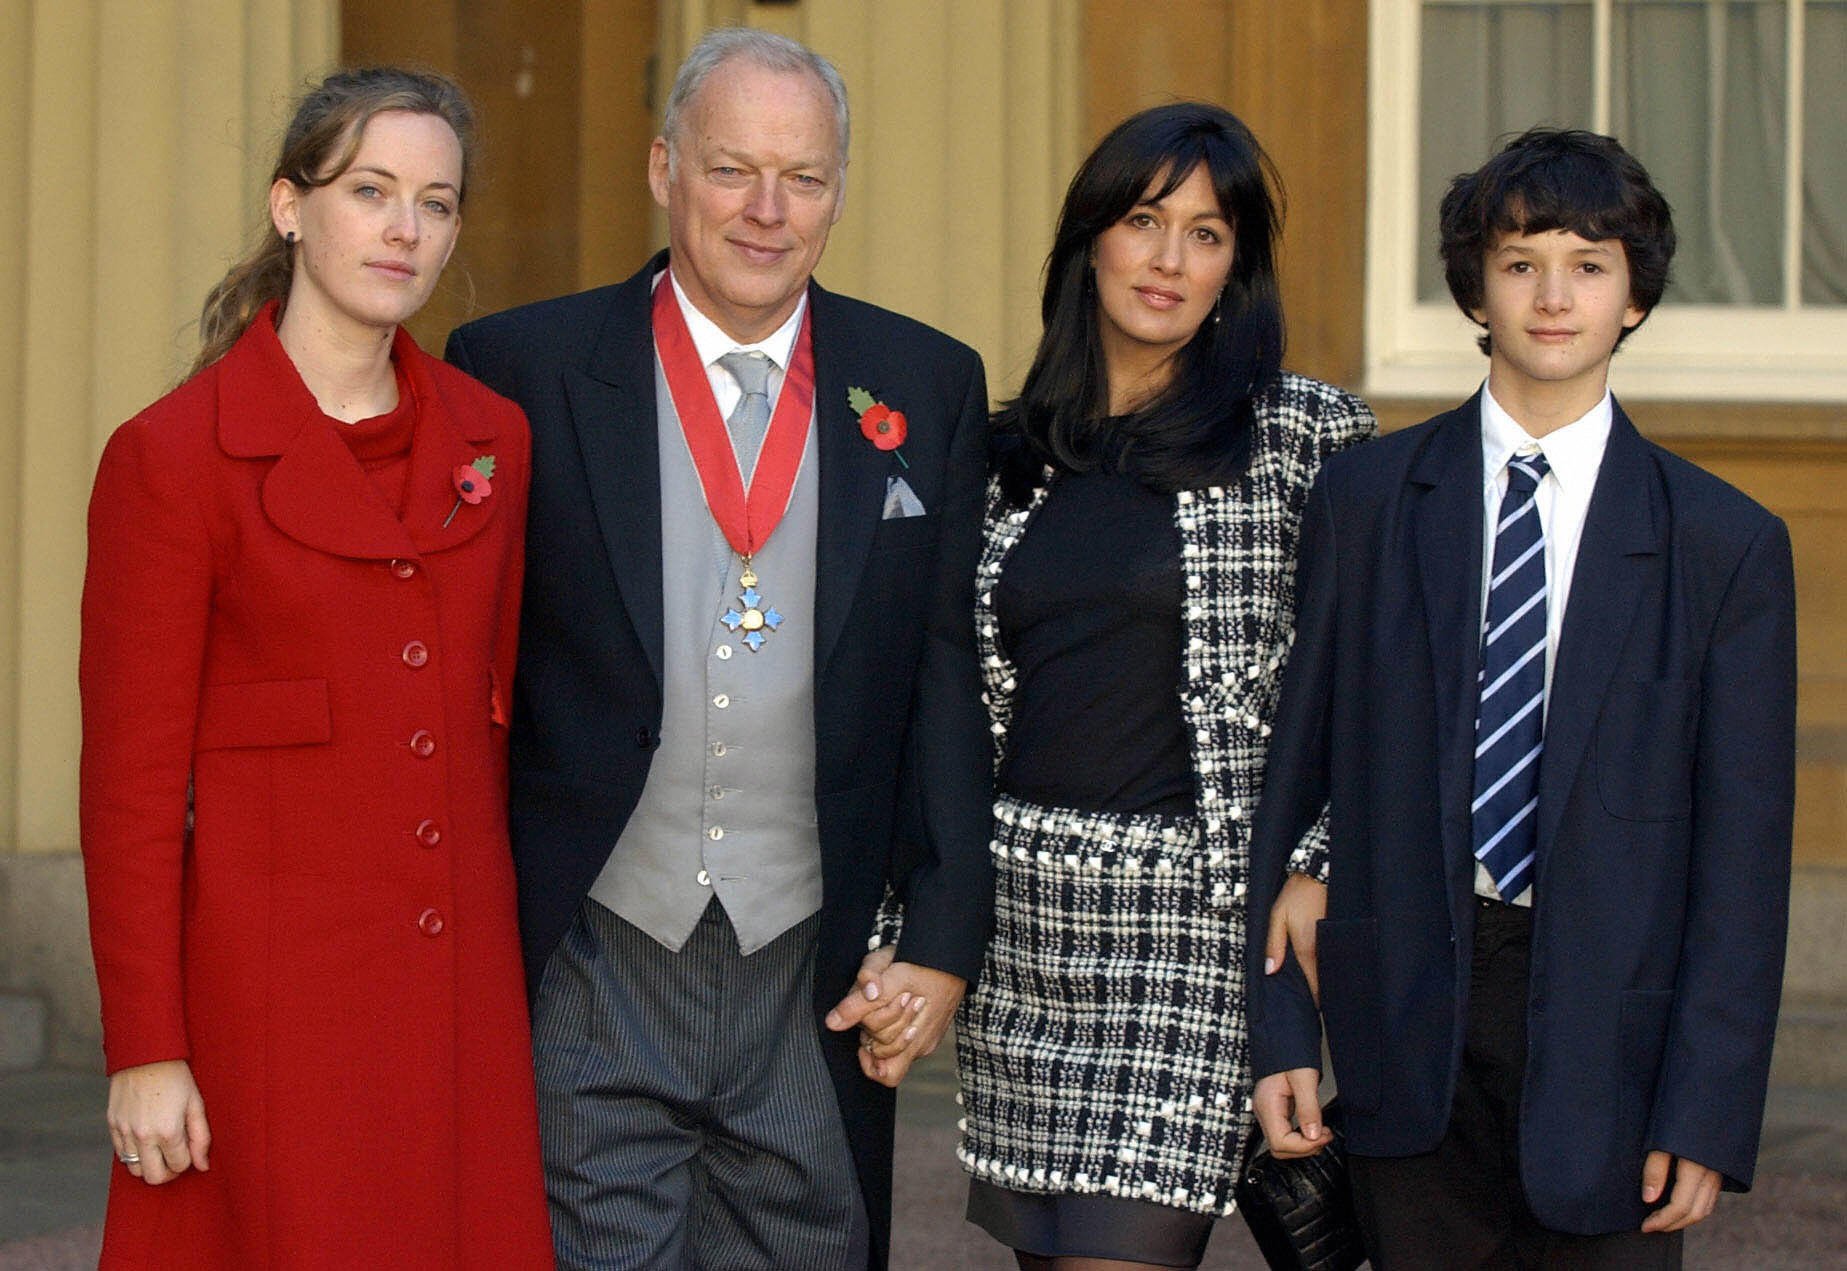 David Gilmour with Alice Gilmour (L) Polly Samson and Charlie Gilmour (R) at Buckingham Palace in London, England, on November 7, 2003. | Source: Getty Images